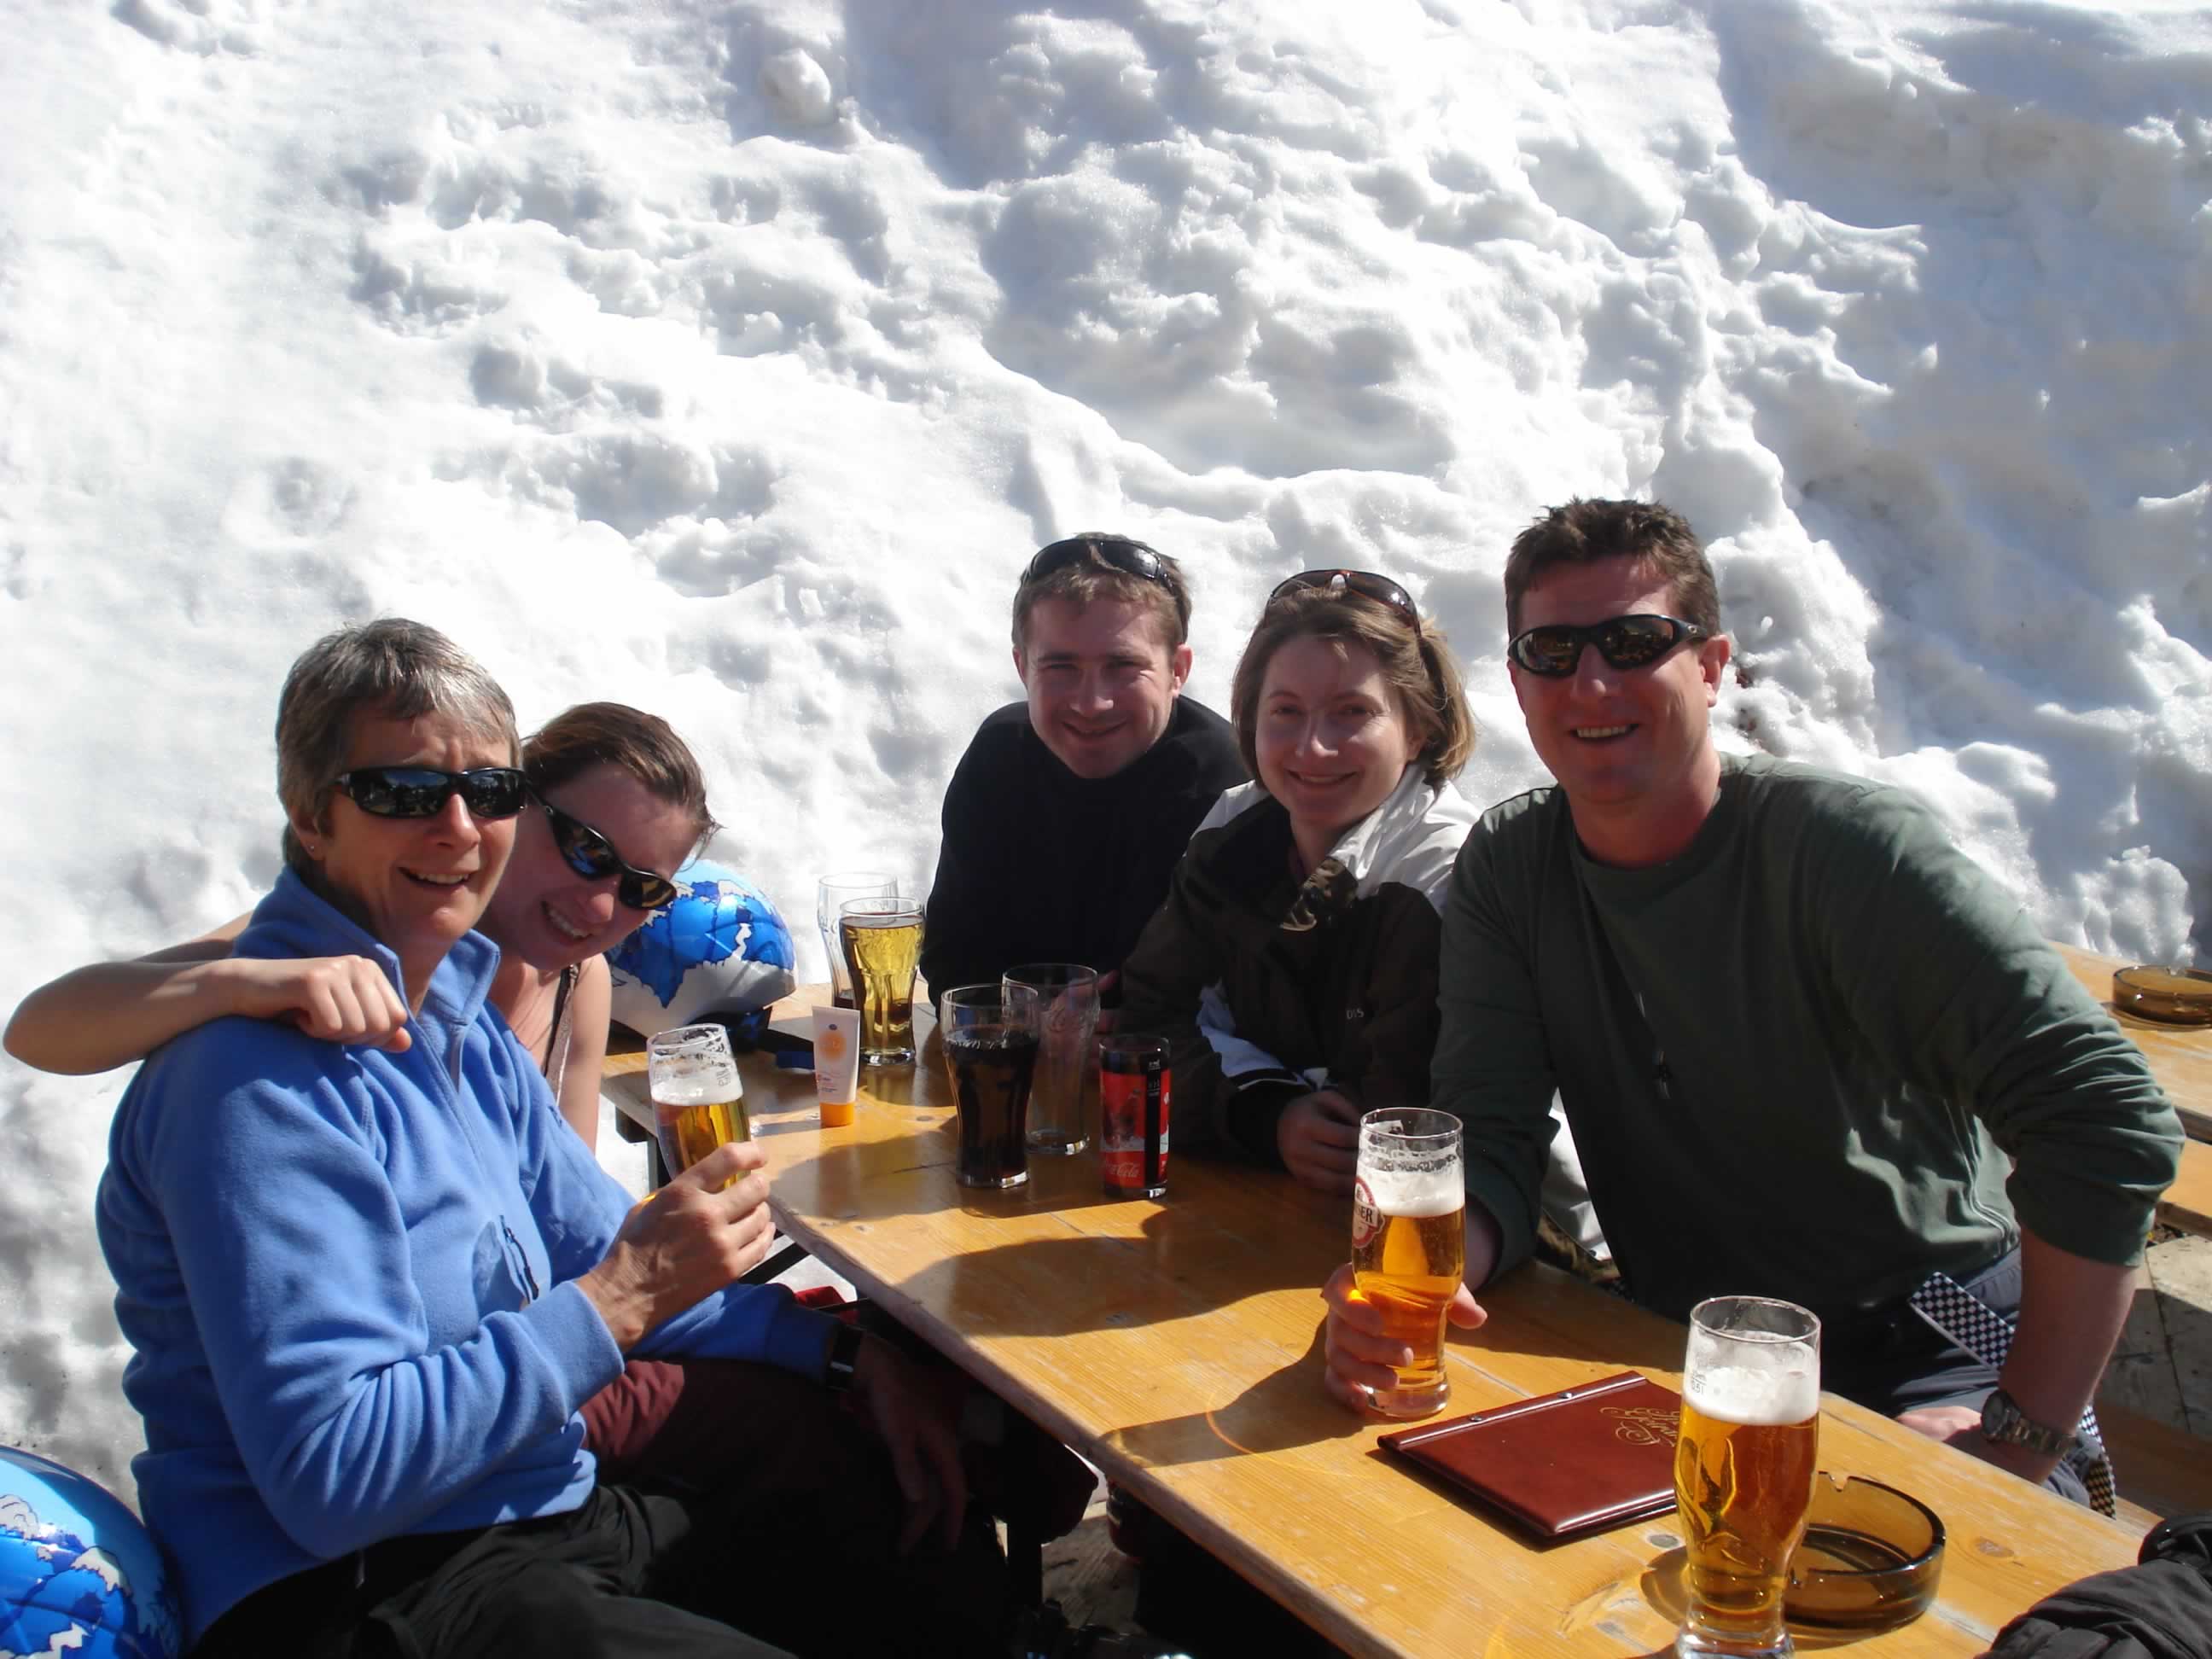 lunchtime on the slopes